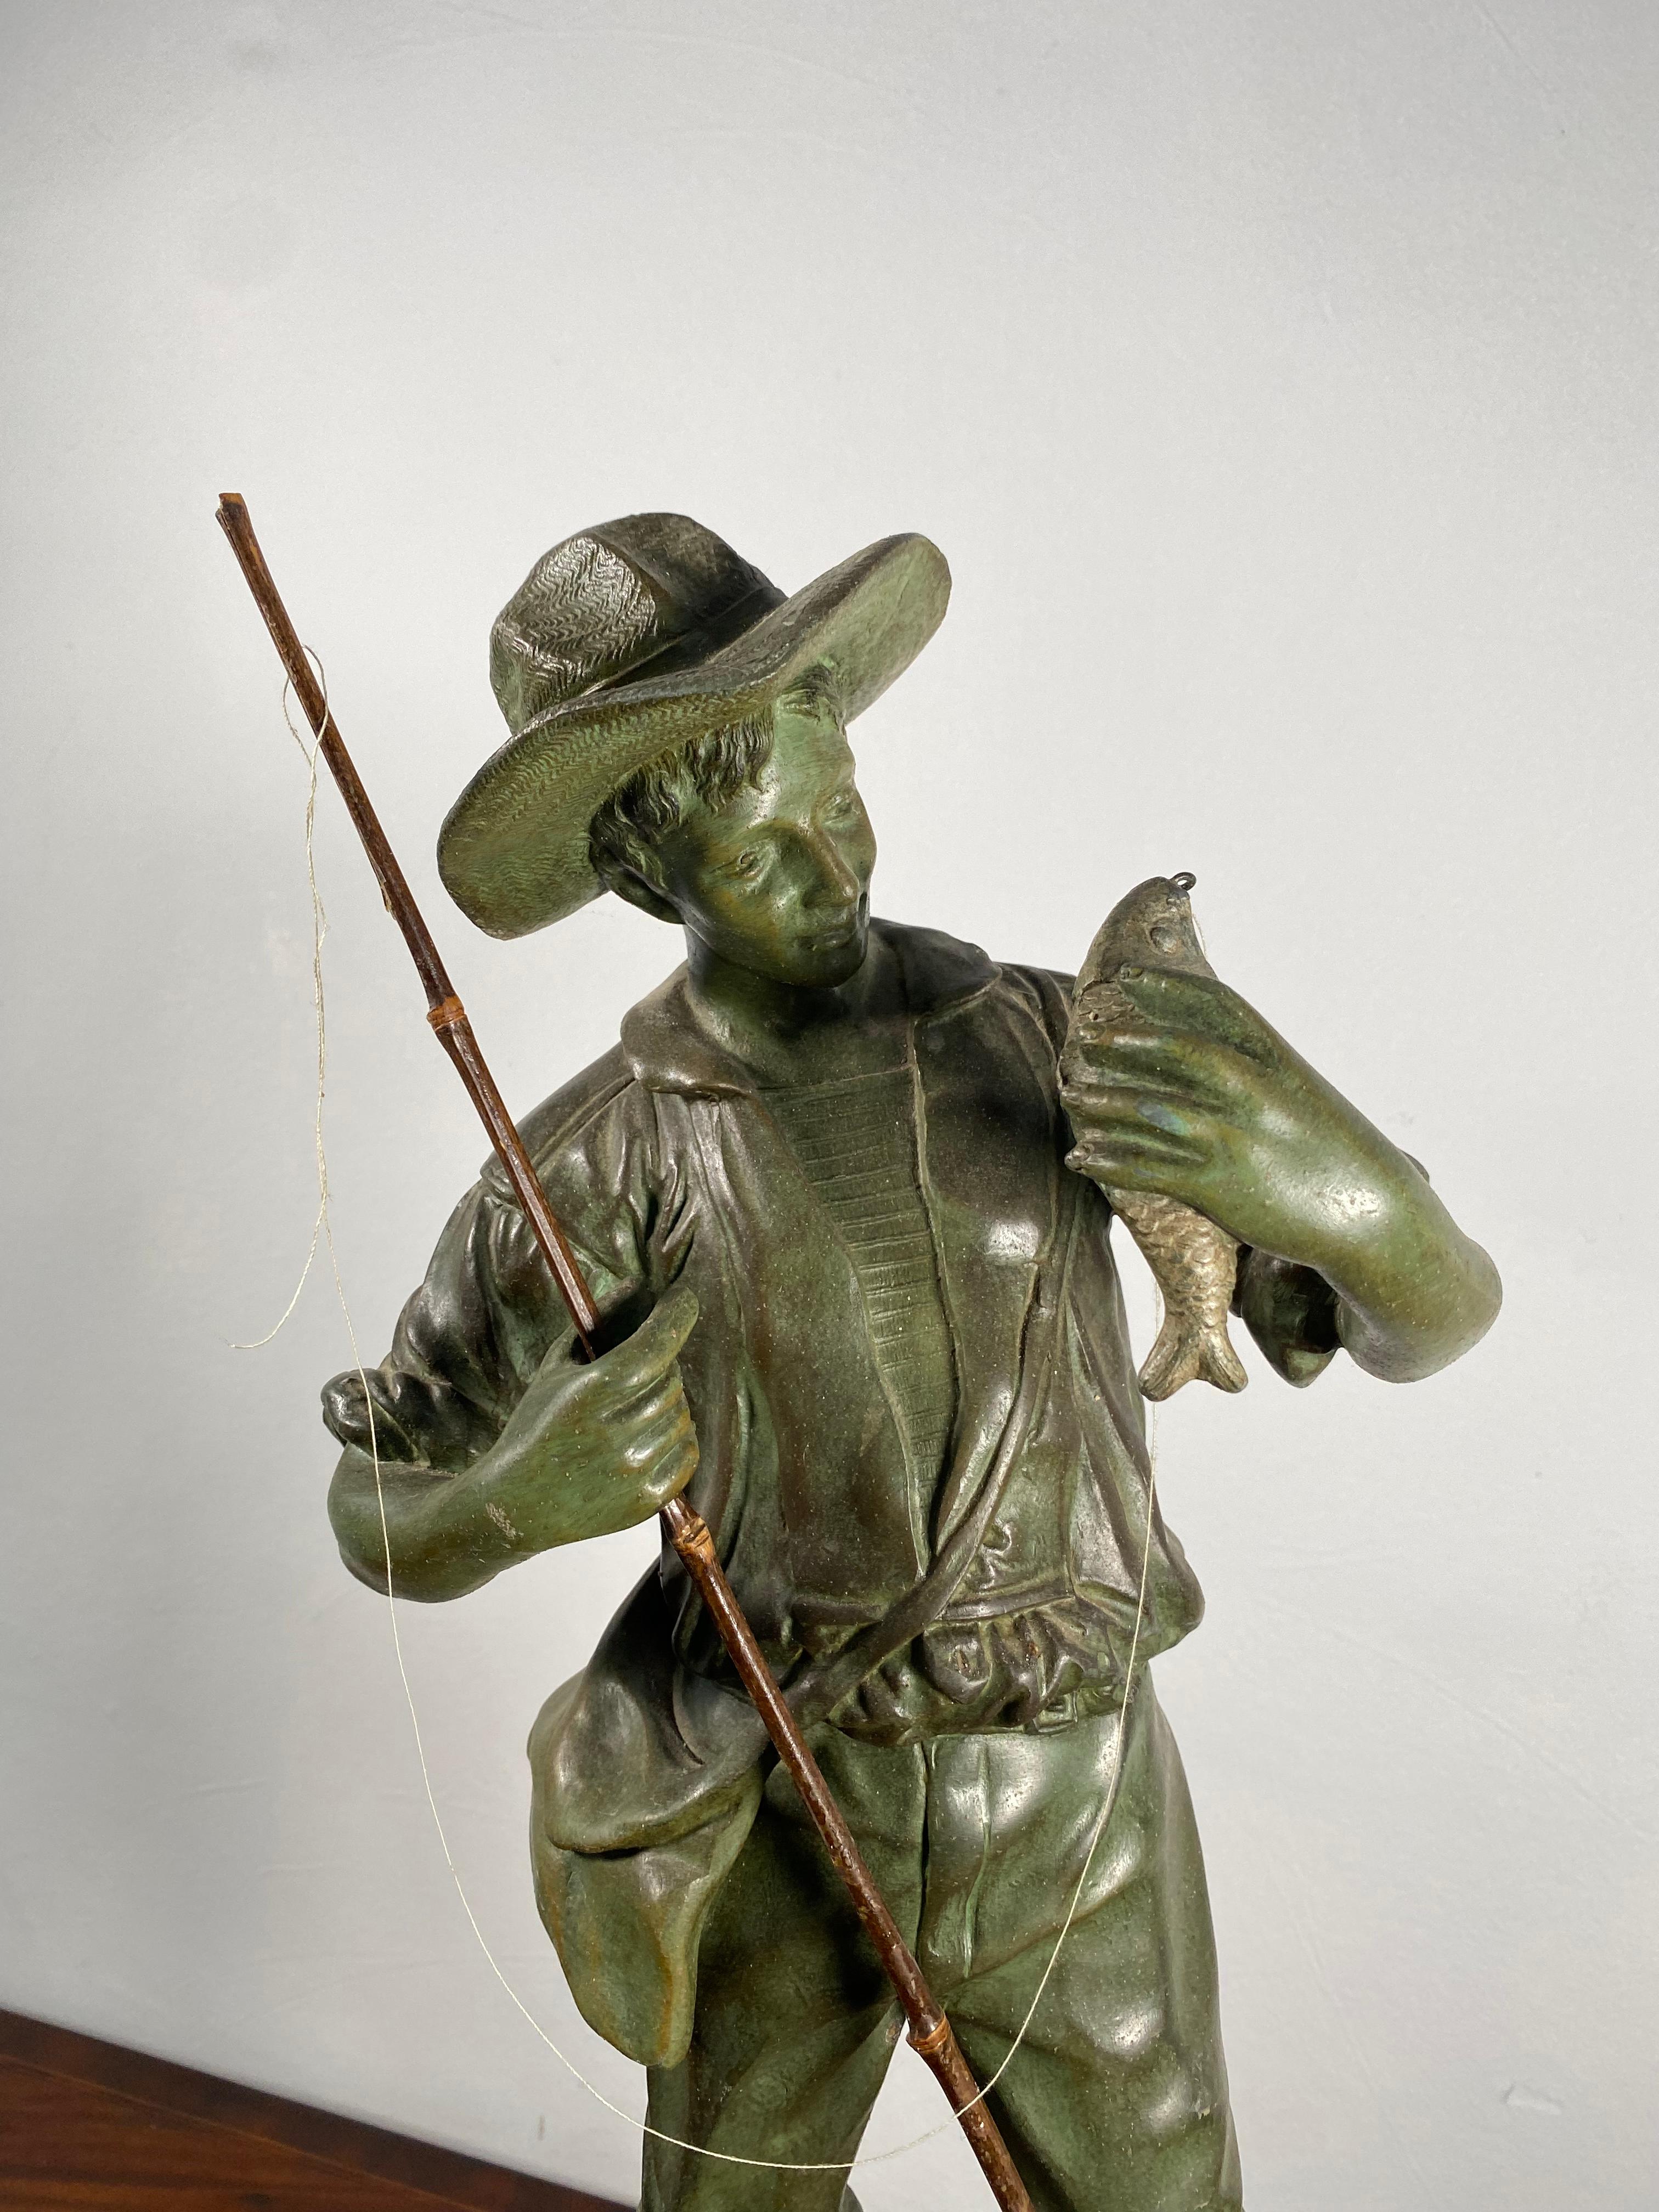 A fantastic bronze depicting a young fisherman proudly holding a trout that he has caught.